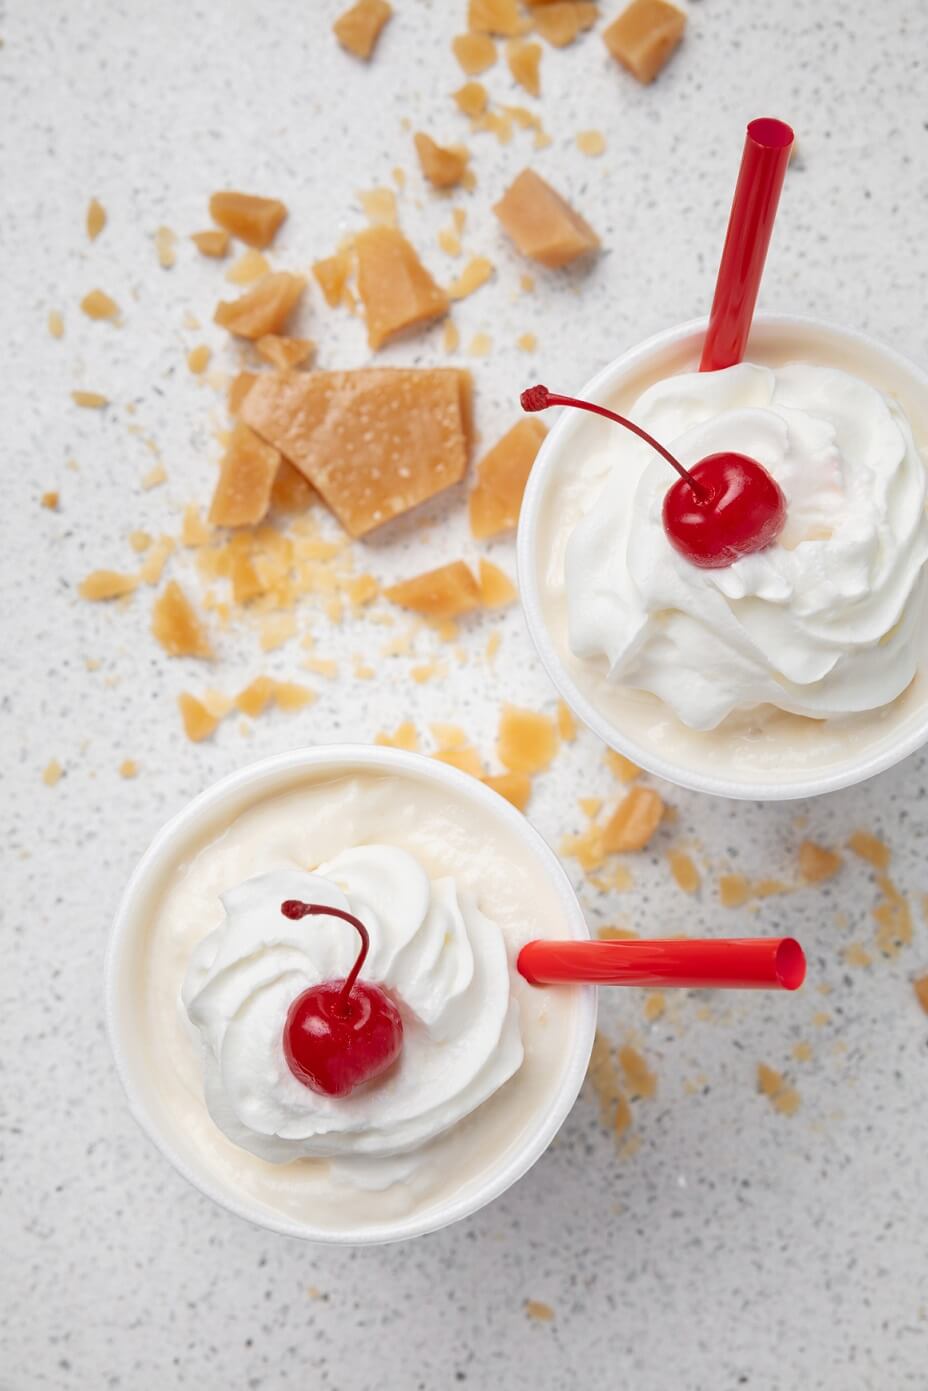 butterscotch crumble milkshake with whipped cream and a cherry